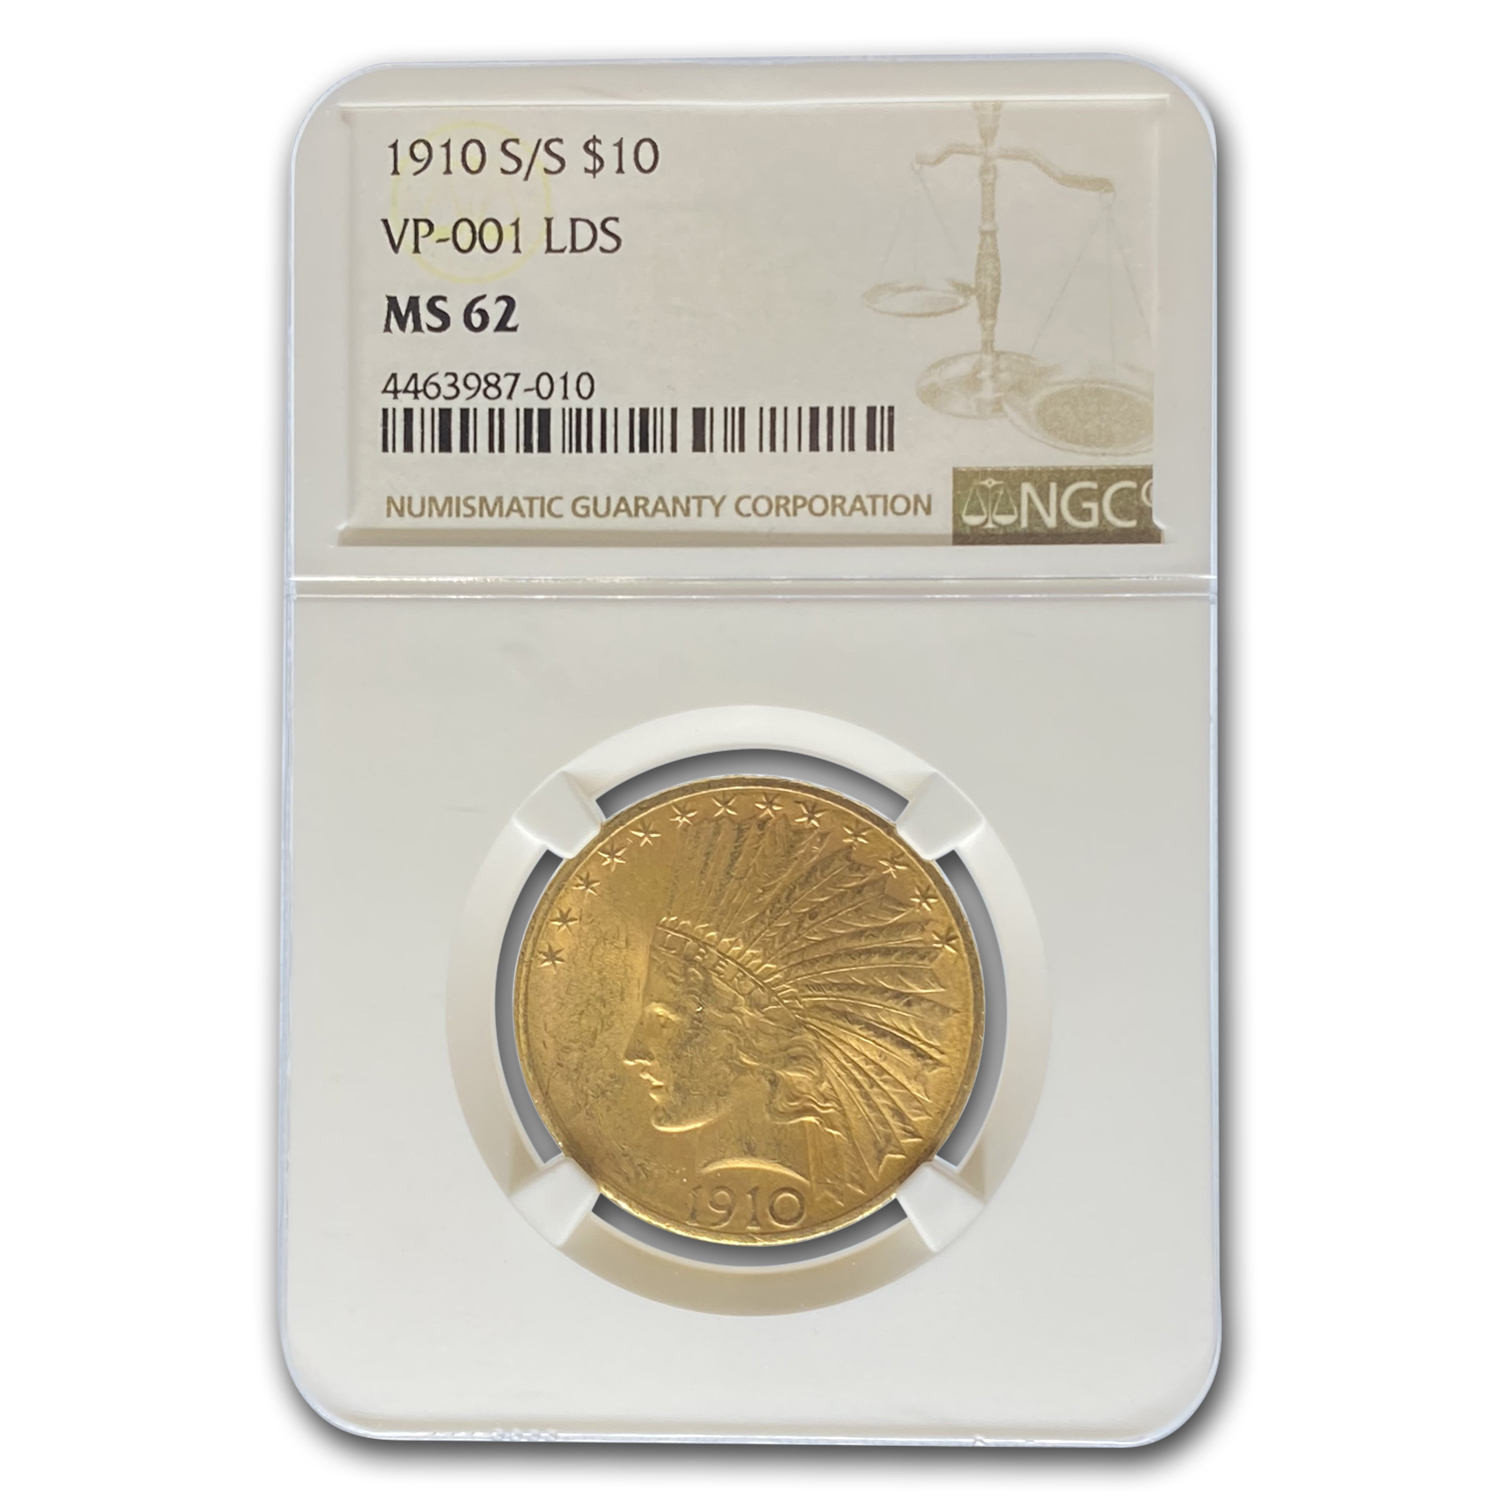 Buy 1910-S/S $10 Indian Gold Eagle MS-62 NGC (VP-001 LDS)